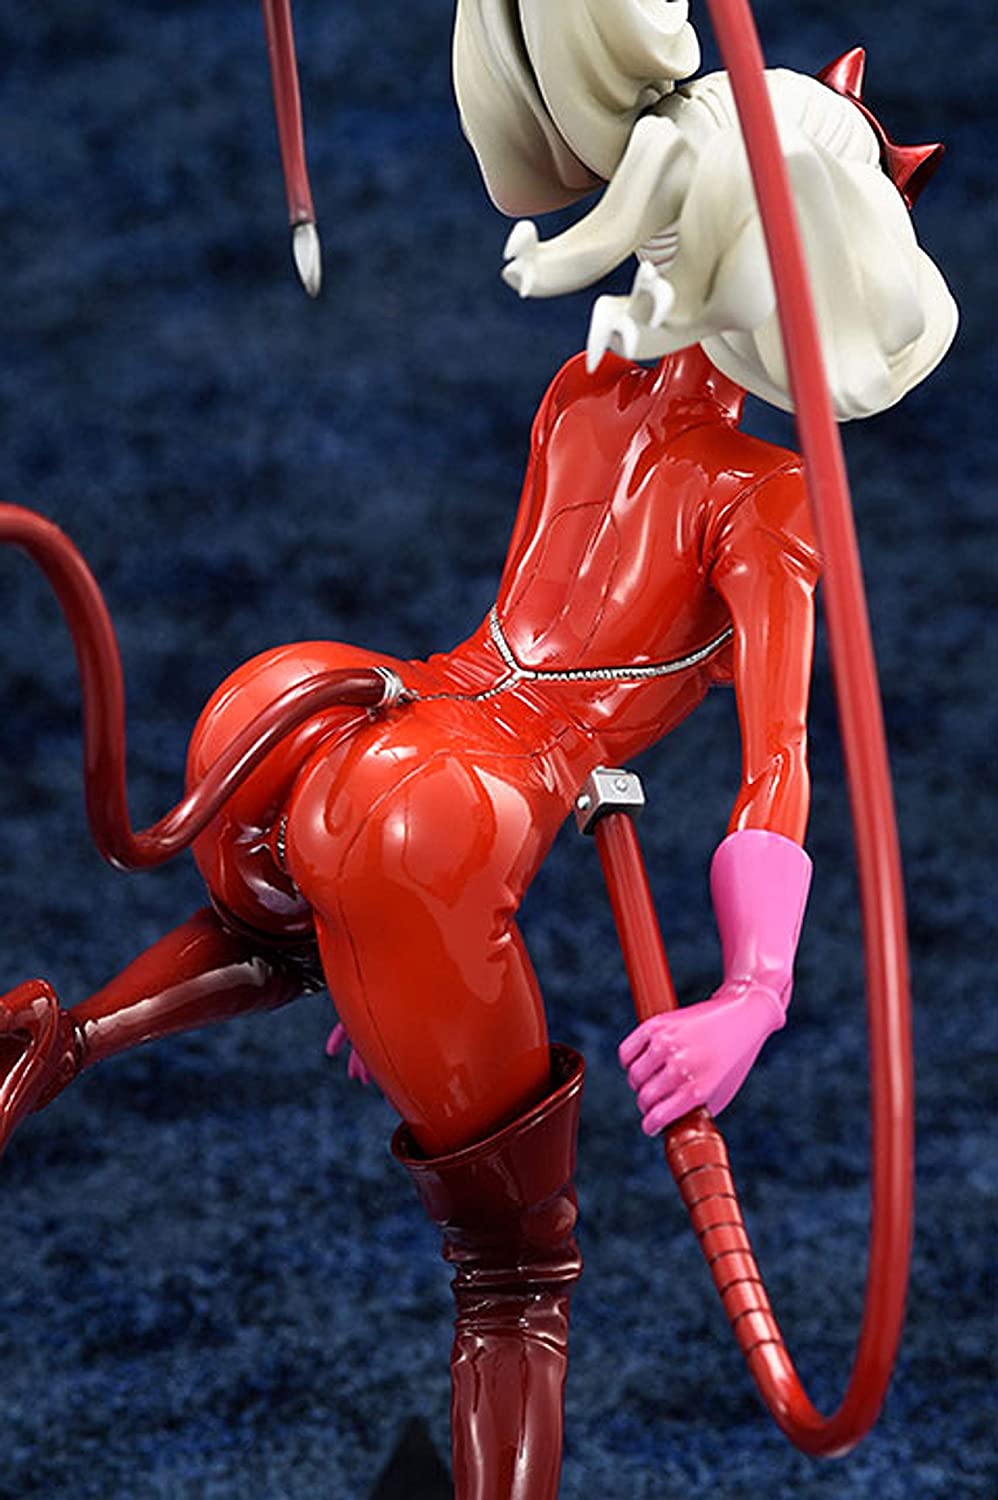 Persona 5 - Ann Takamaki Phantom Ver. 1/7 Complete Figure [Monthly HobbyJAPAN 2017 June Issue & July Issue Mail Order, Particular Shop Exclusive] | animota